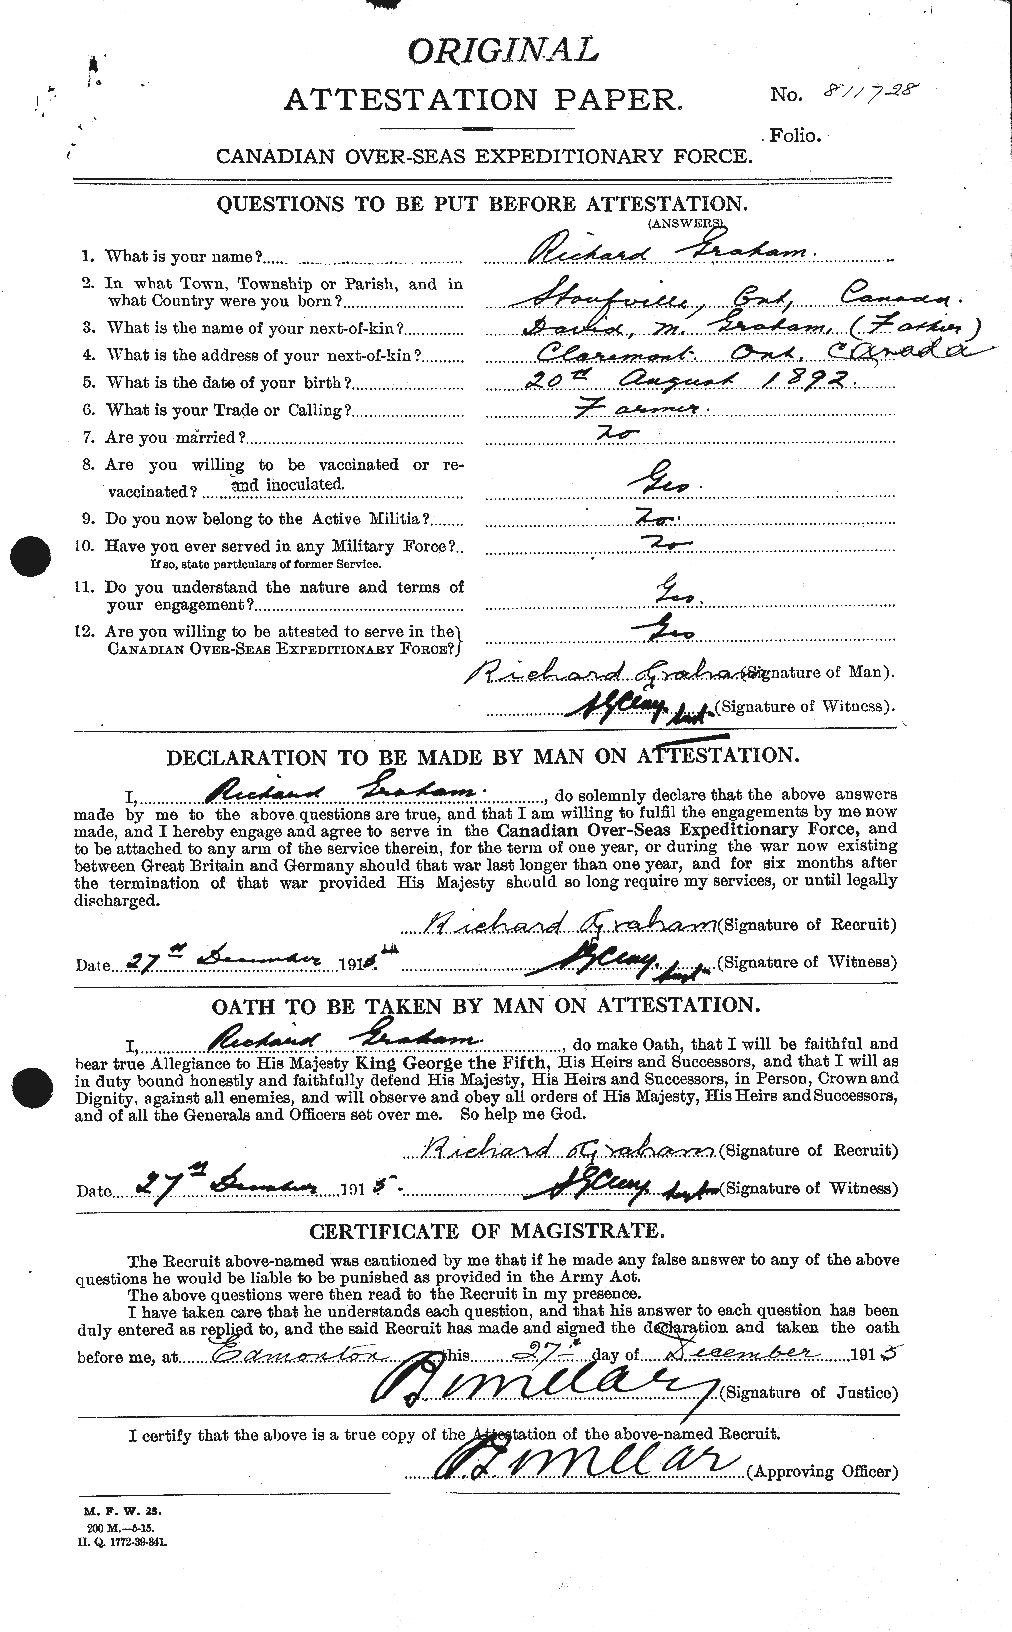 Personnel Records of the First World War - CEF 359366a